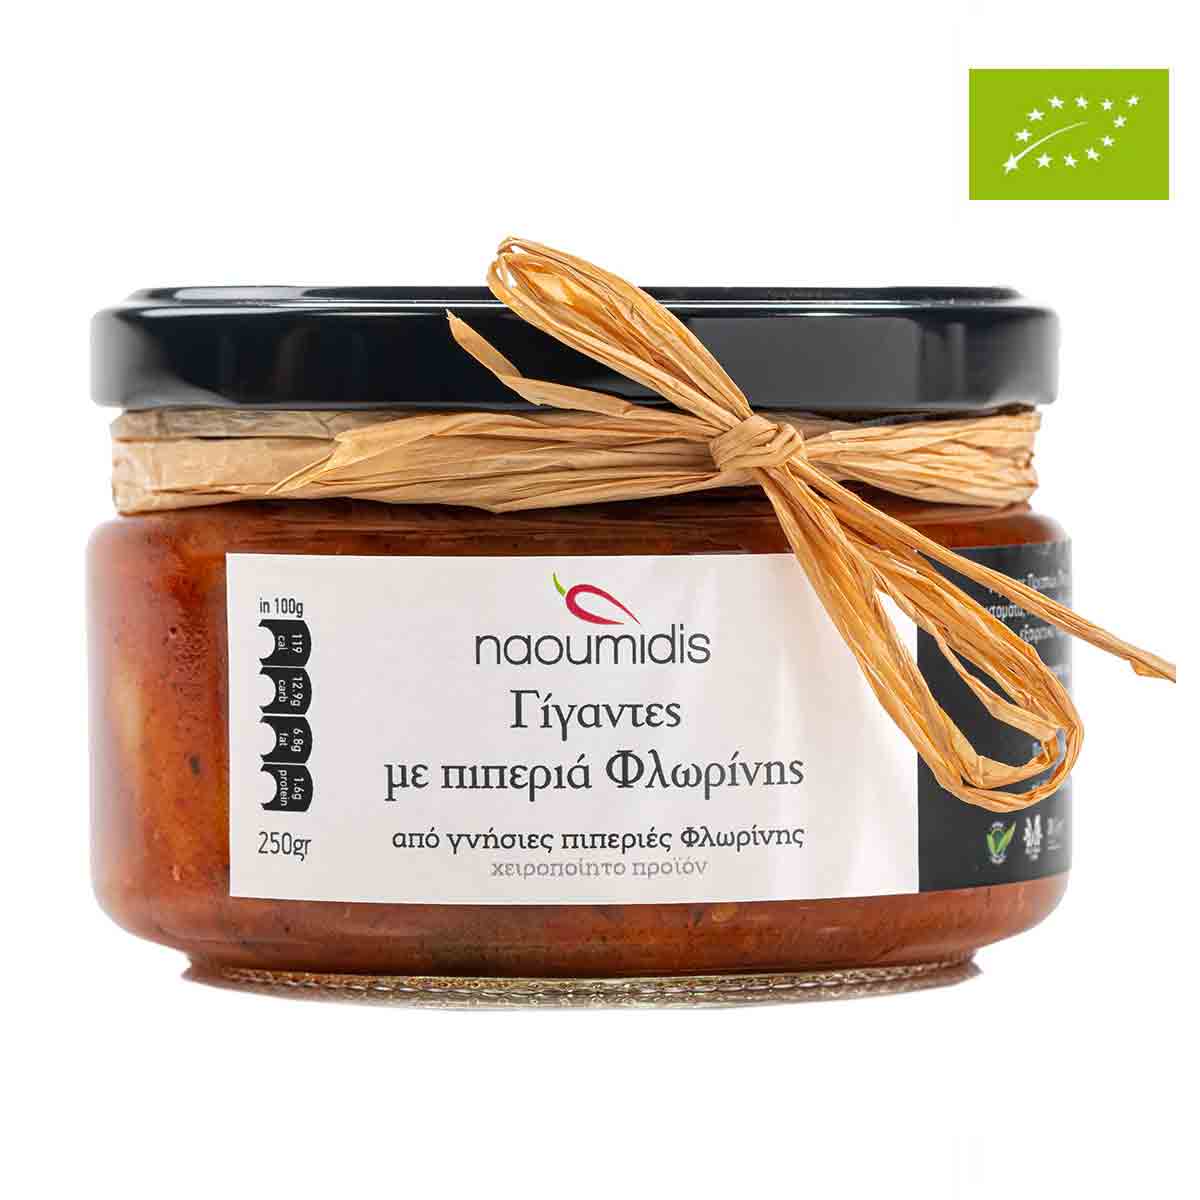 Bio Baked Giant Beans with Florina peppers, tomato and olive oil, 250gr, "Naoumidis"